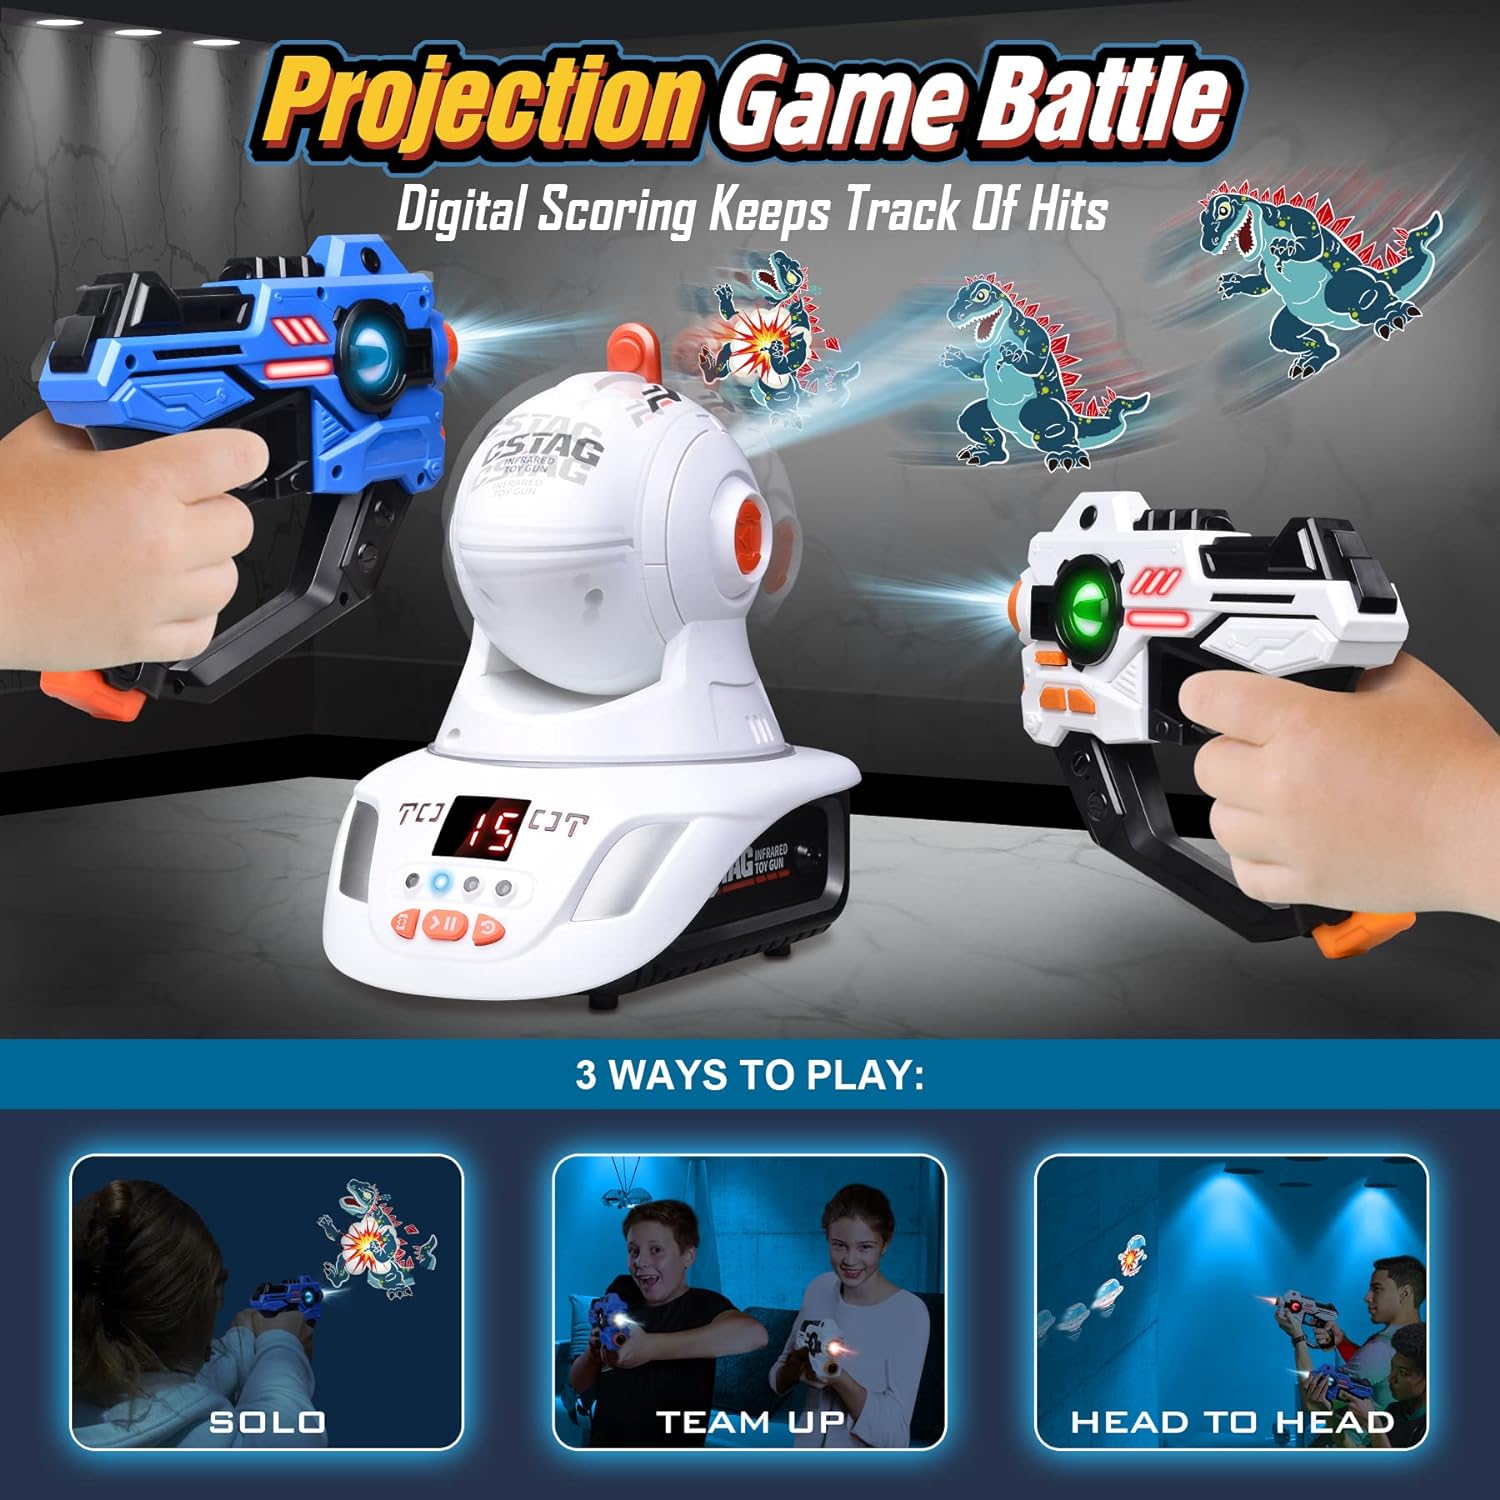 Laser Tag Gun Set , Rechargeable Laser Gun with Projector & 3 Target  Cartridges, Laser Tag Game, Birthday Gift for Boys & Girls age 3 & Up.